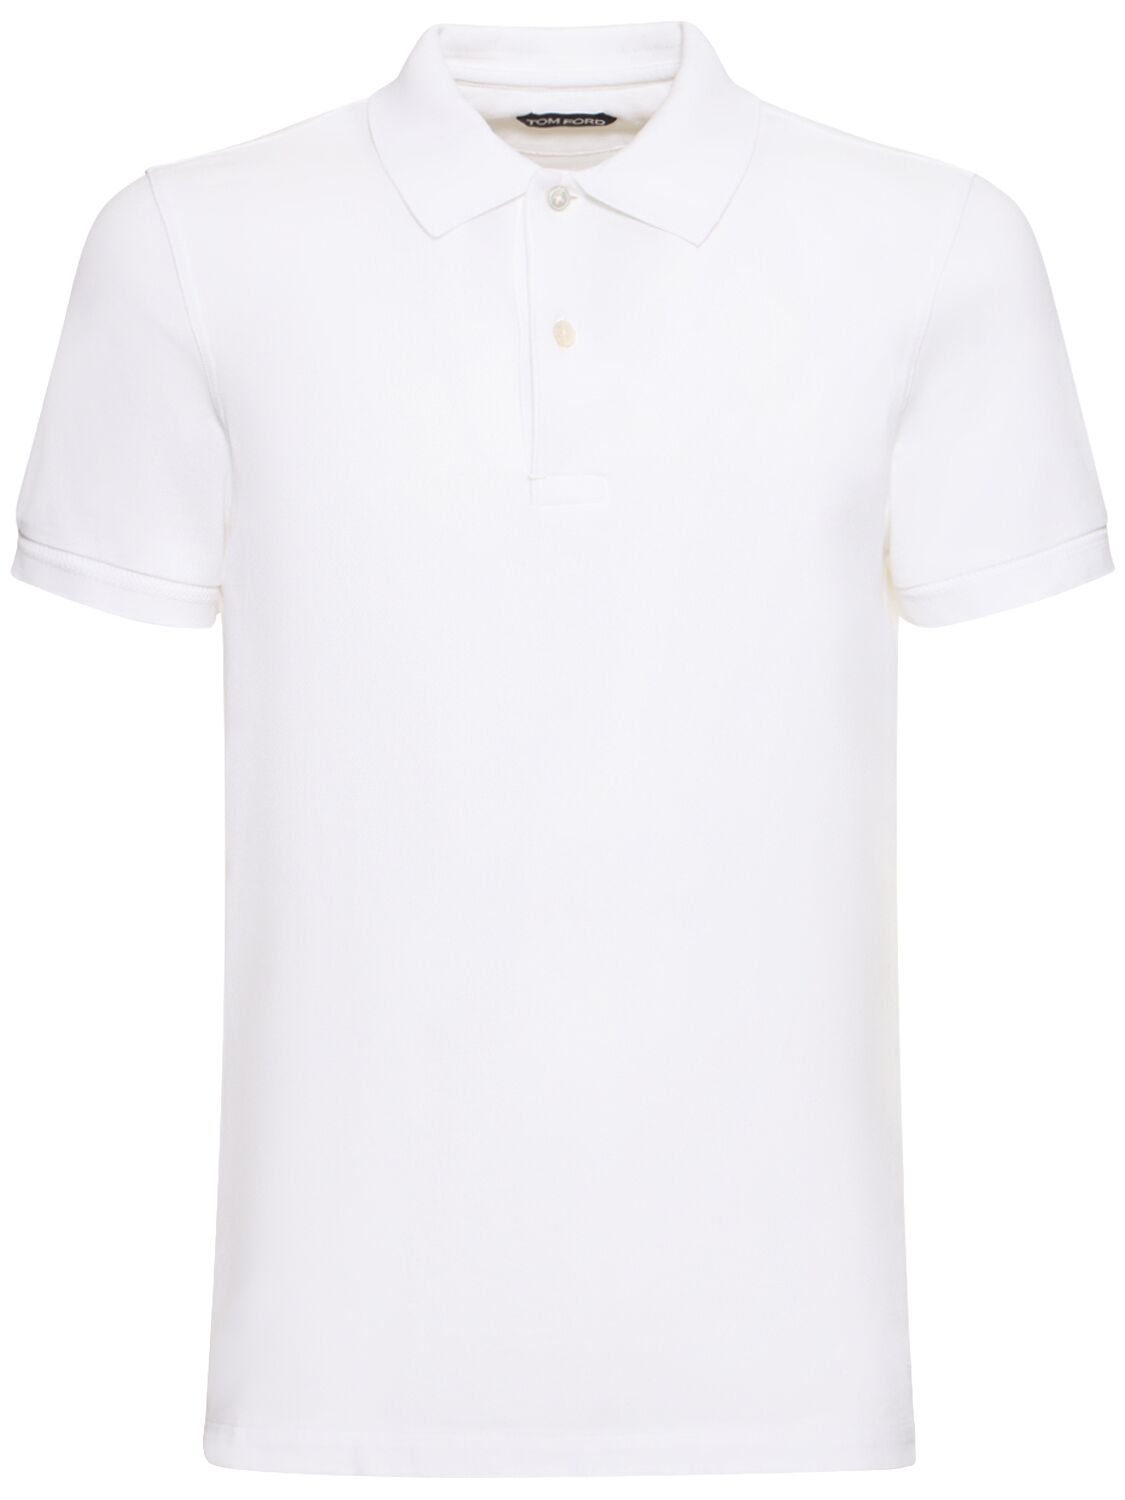 Tom Ford Tennis Polo. In White